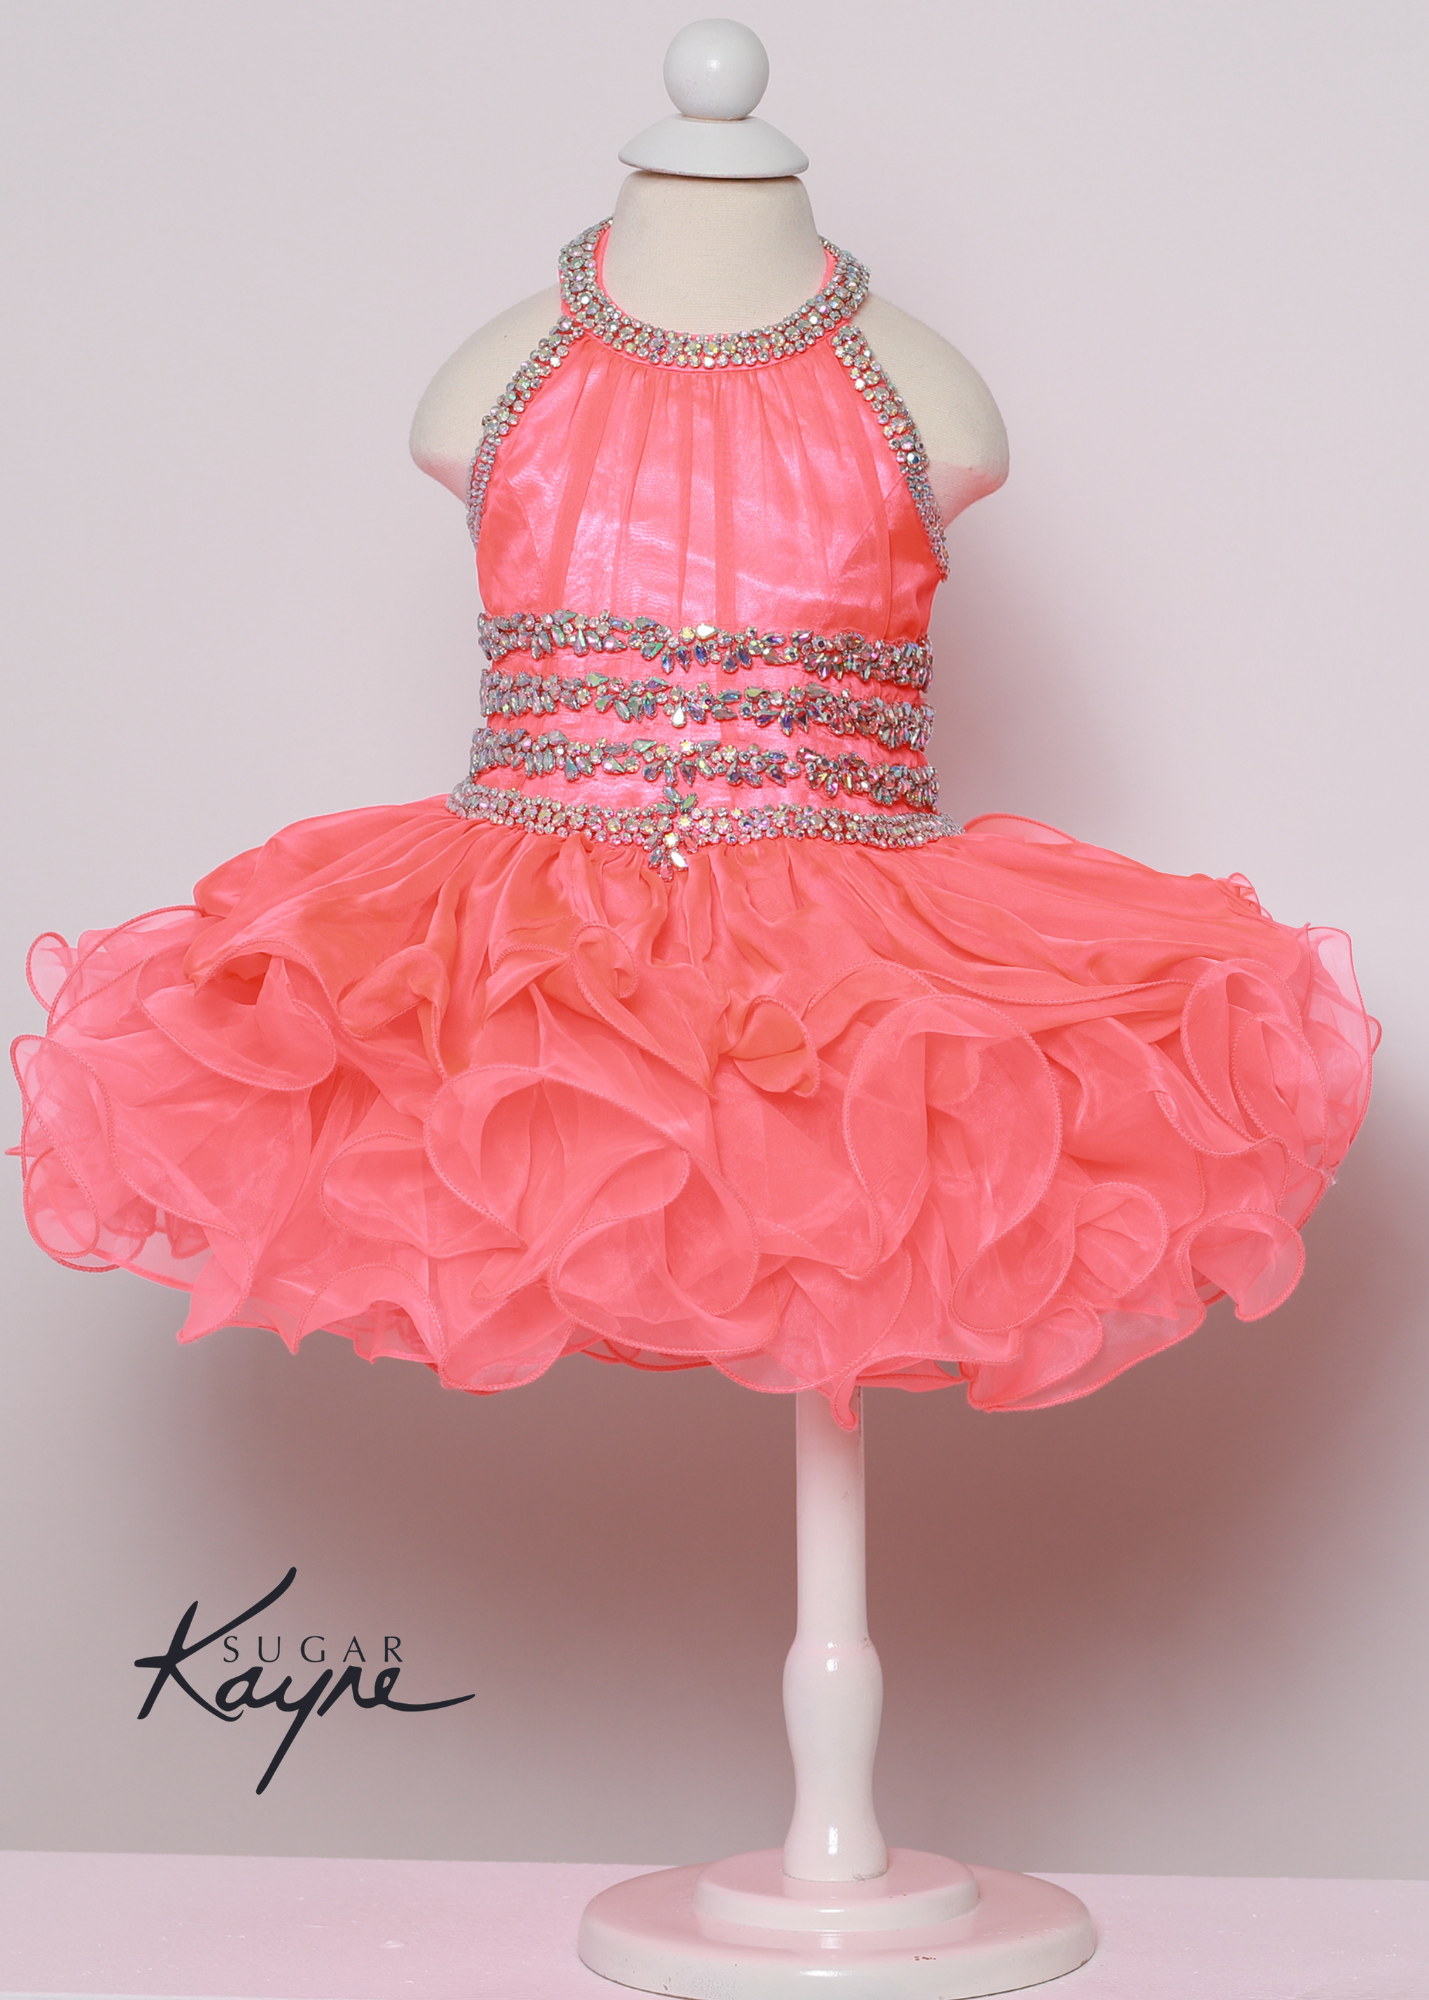 C216 Short girls Cupcake Ruffle High Neckline Pageant Dress Bow Crystal Embellished Have your little cupcake bring on all the charm in this stunning chiffon and organza gown. The corset back is the perfect addition as the little one grows!  Colors: Aqua, Hot Coral  Sizes:  0M, 12M, 18M, 24M, 2T, 3T, 4T, 5T, 6M, 6T  Fabric Chiffon, Organza, Satin Lining